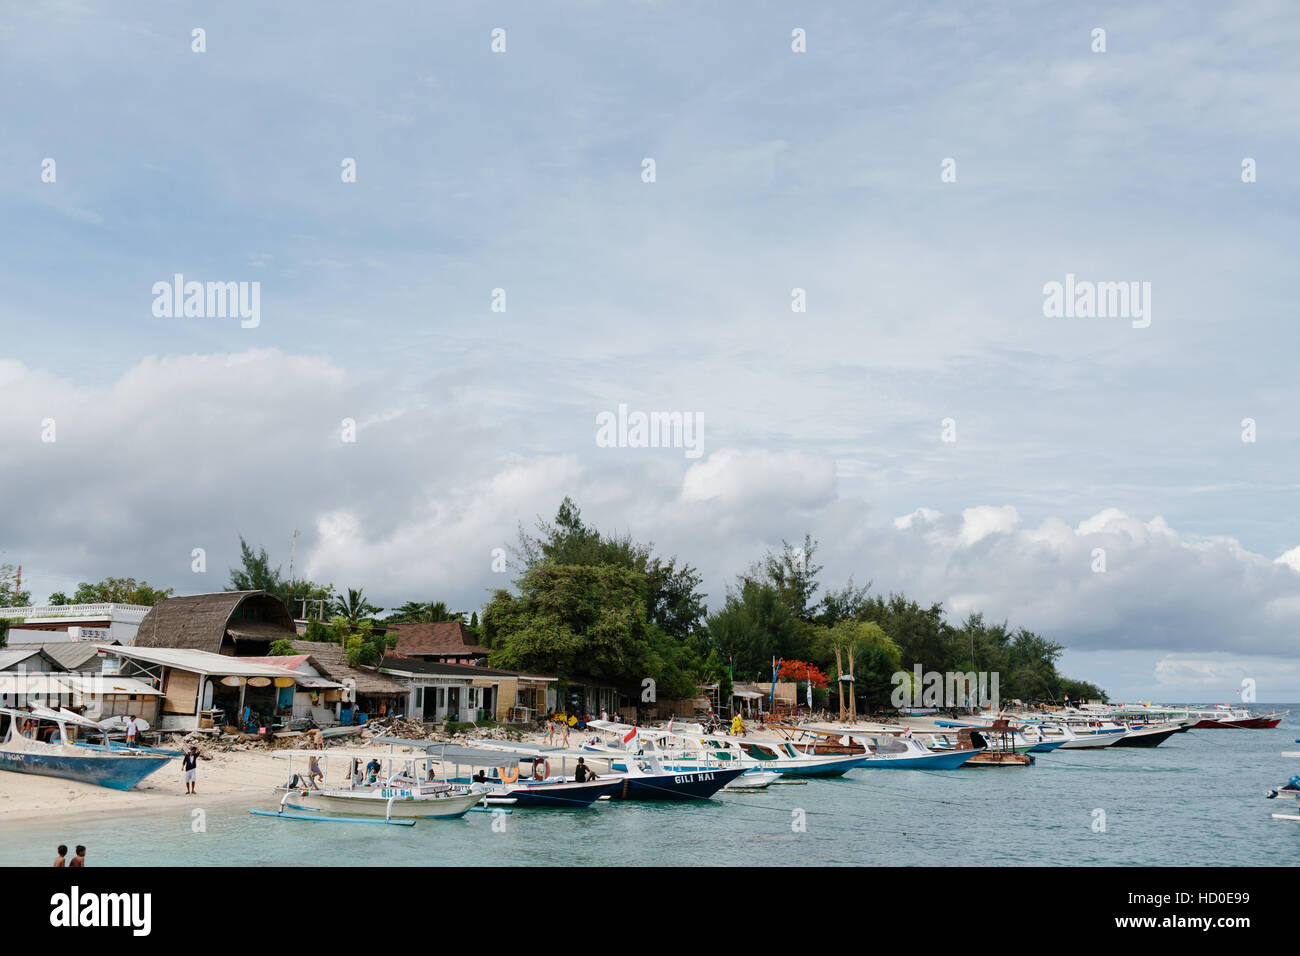 A view of the eastern beach of Gili Trawangan with many boats lining the shore Stock Photo